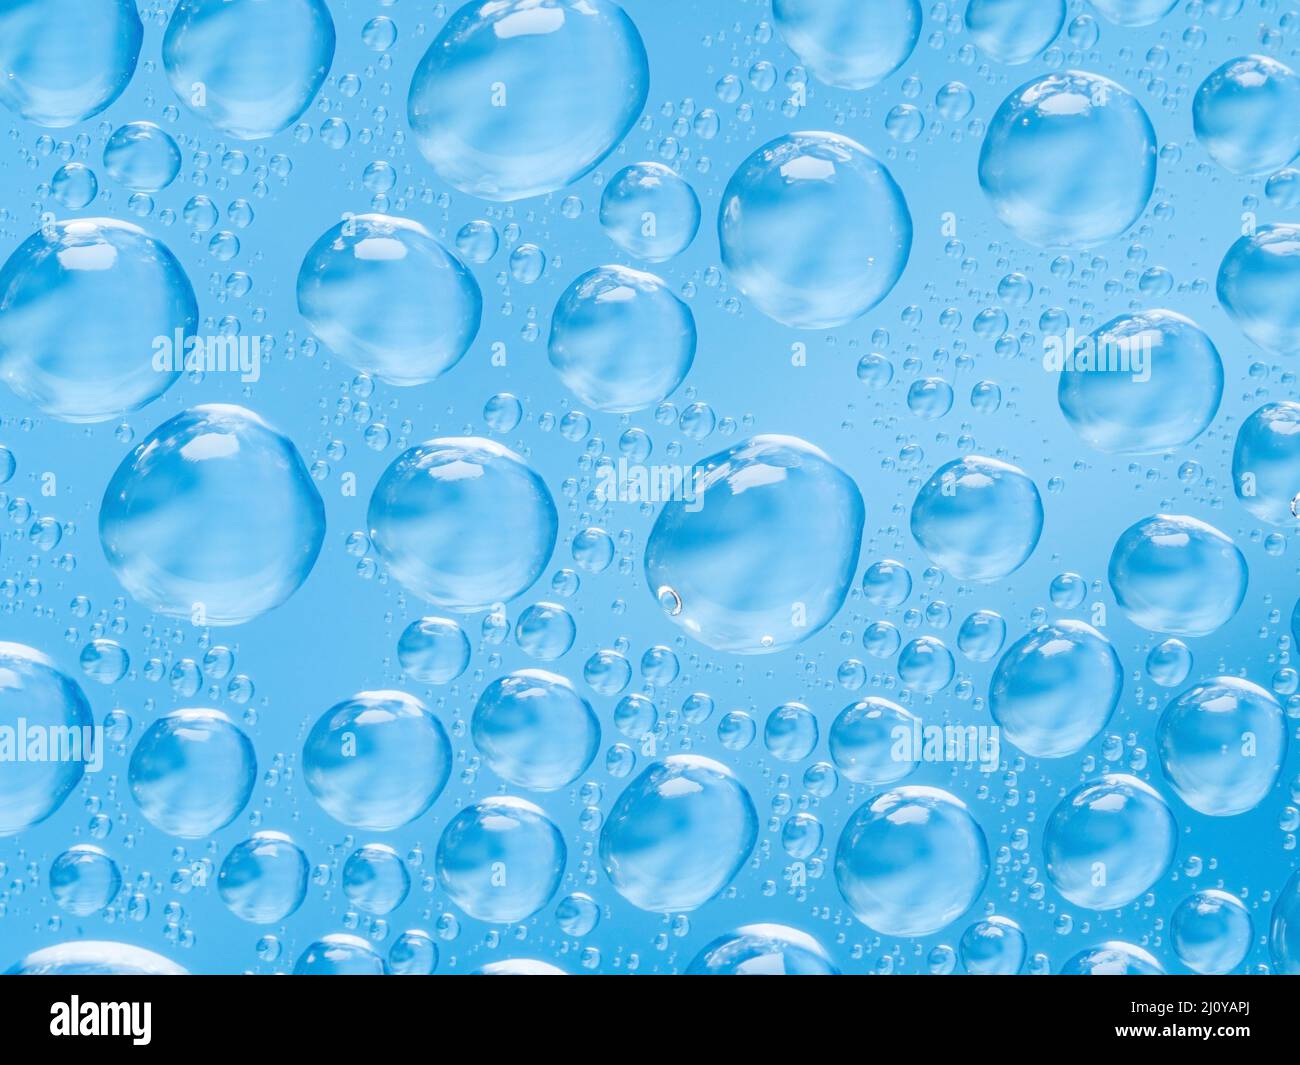 https://c8.alamy.com/comp/2J0YAPJ/abstract-blue-background-with-large-and-small-spherical-convex-drops-of-water-on-glass-bubbles-on-window-macro-close-up-2J0YAPJ.jpg